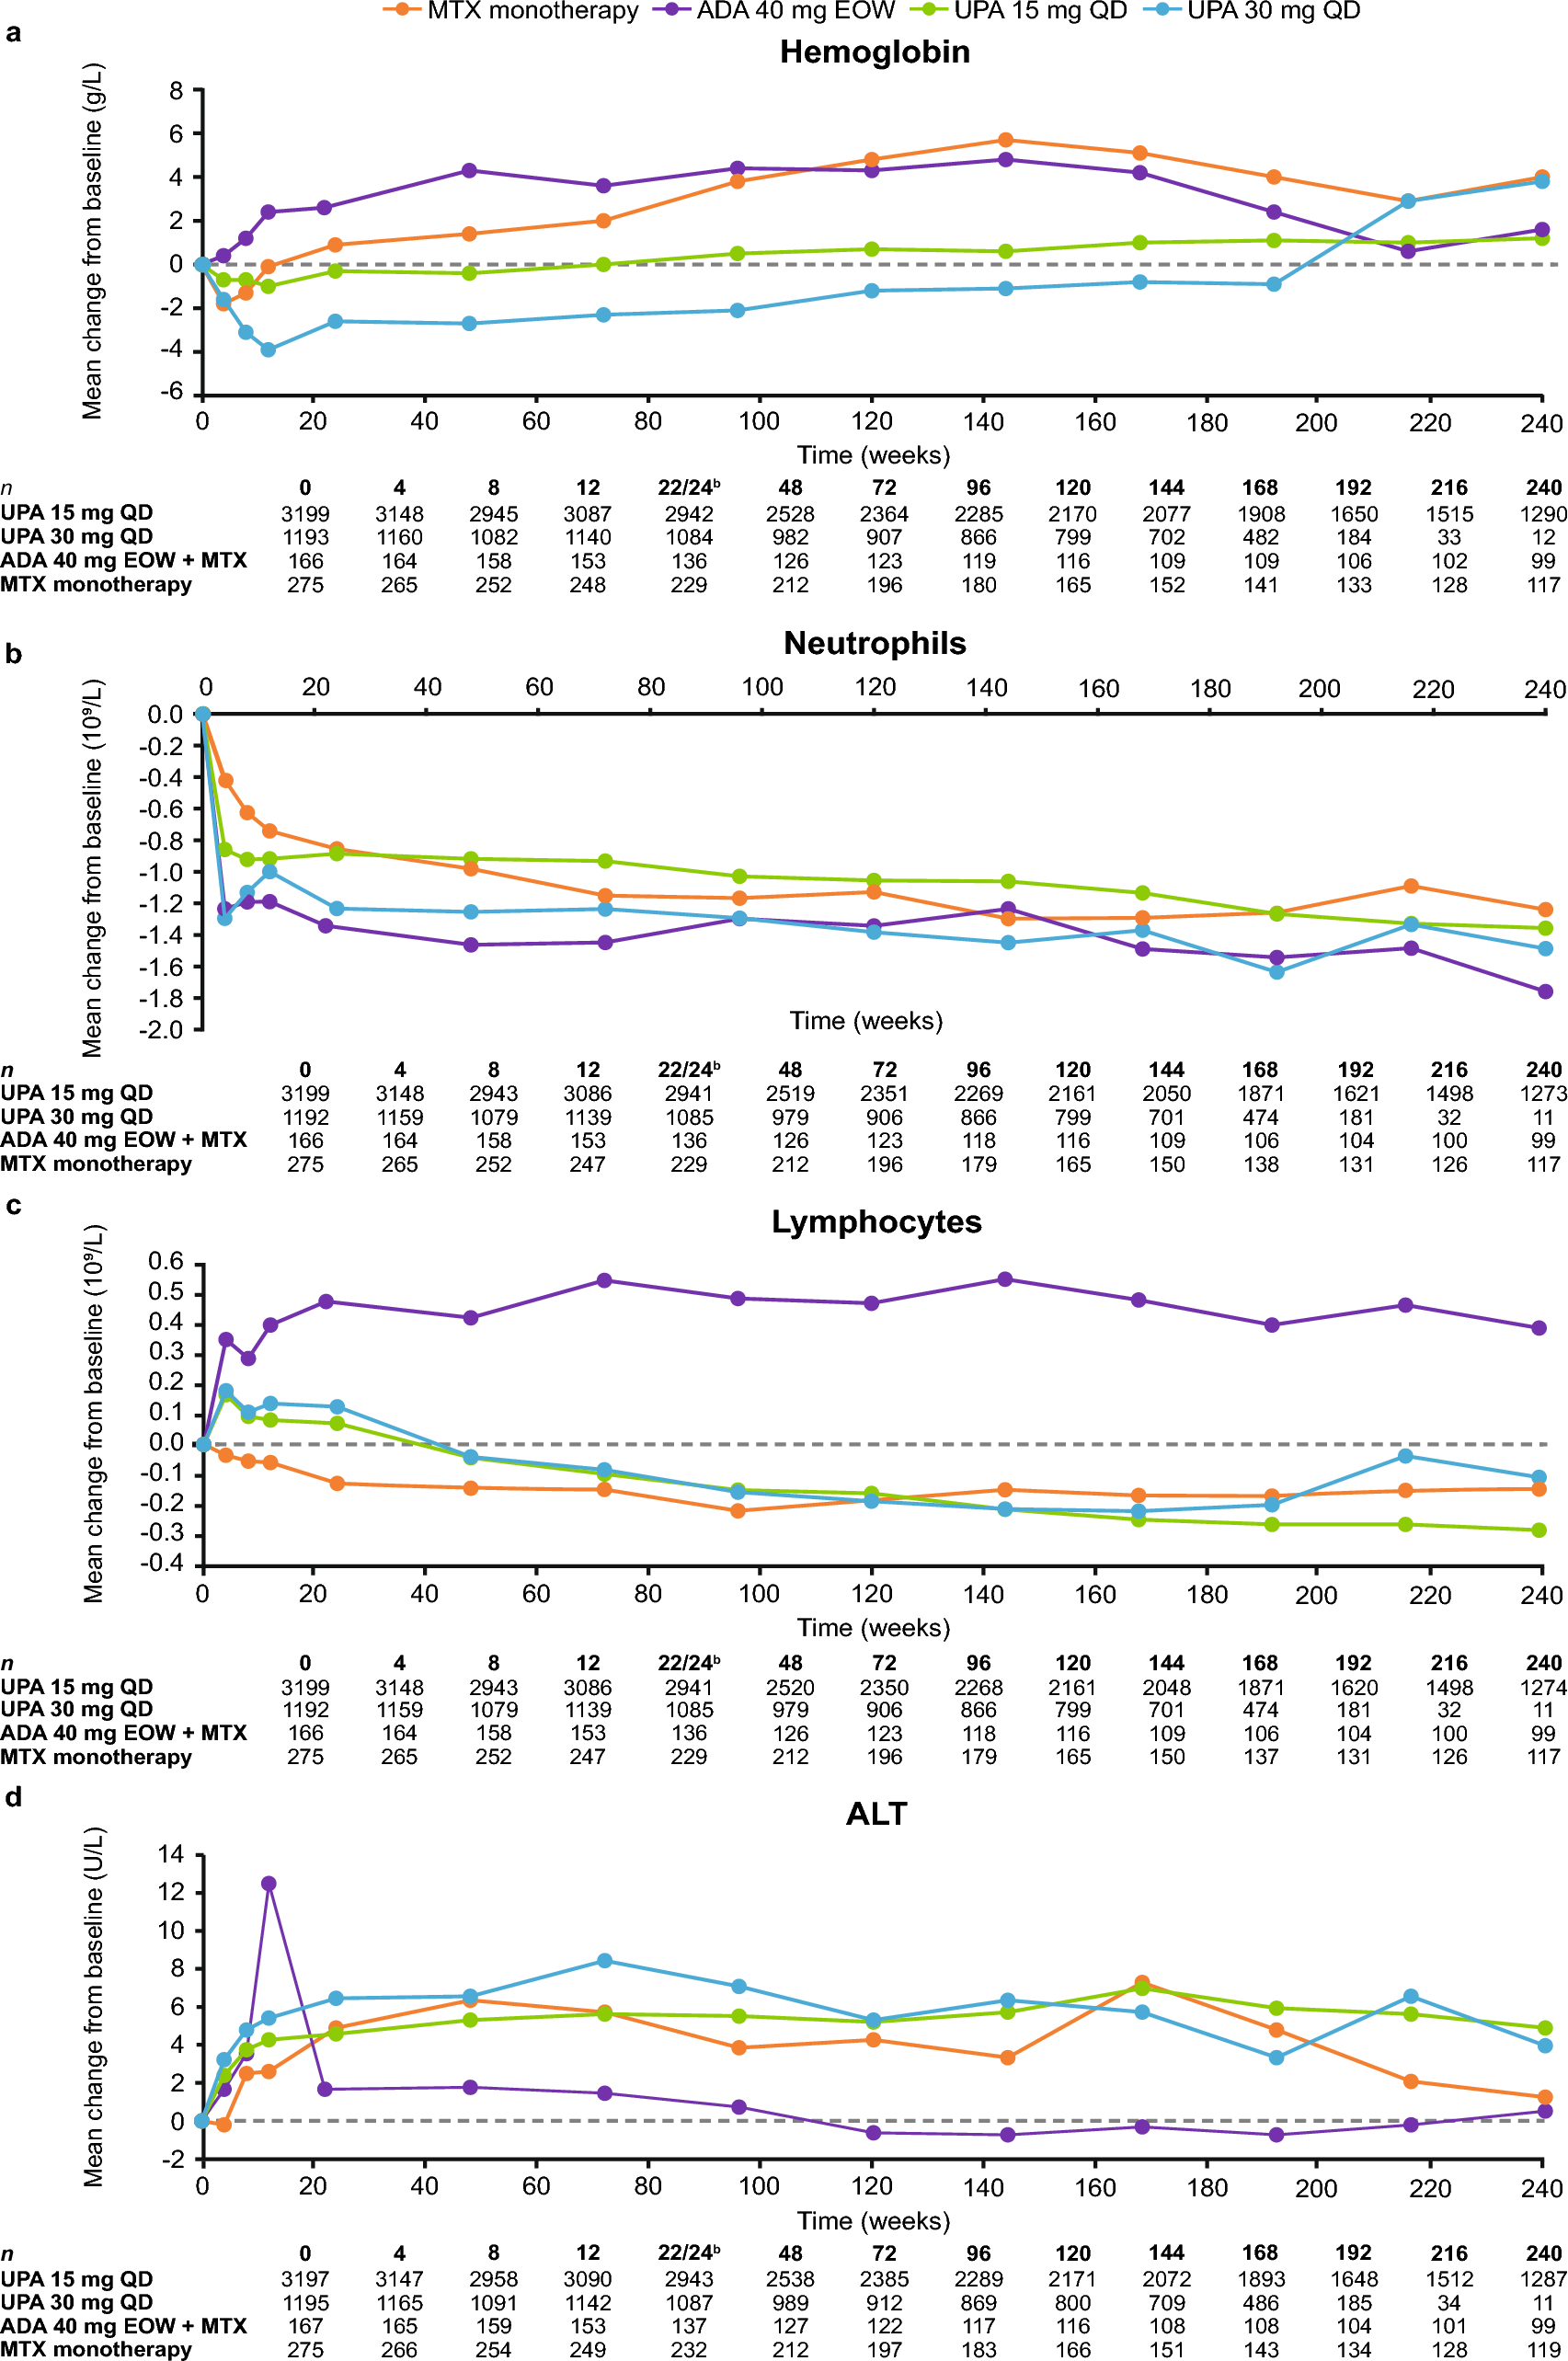 Impact of Upadacitinib on Laboratory Parameters and Related Adverse Events in Patients with RA: Integrated Data Up to 6.5 Years